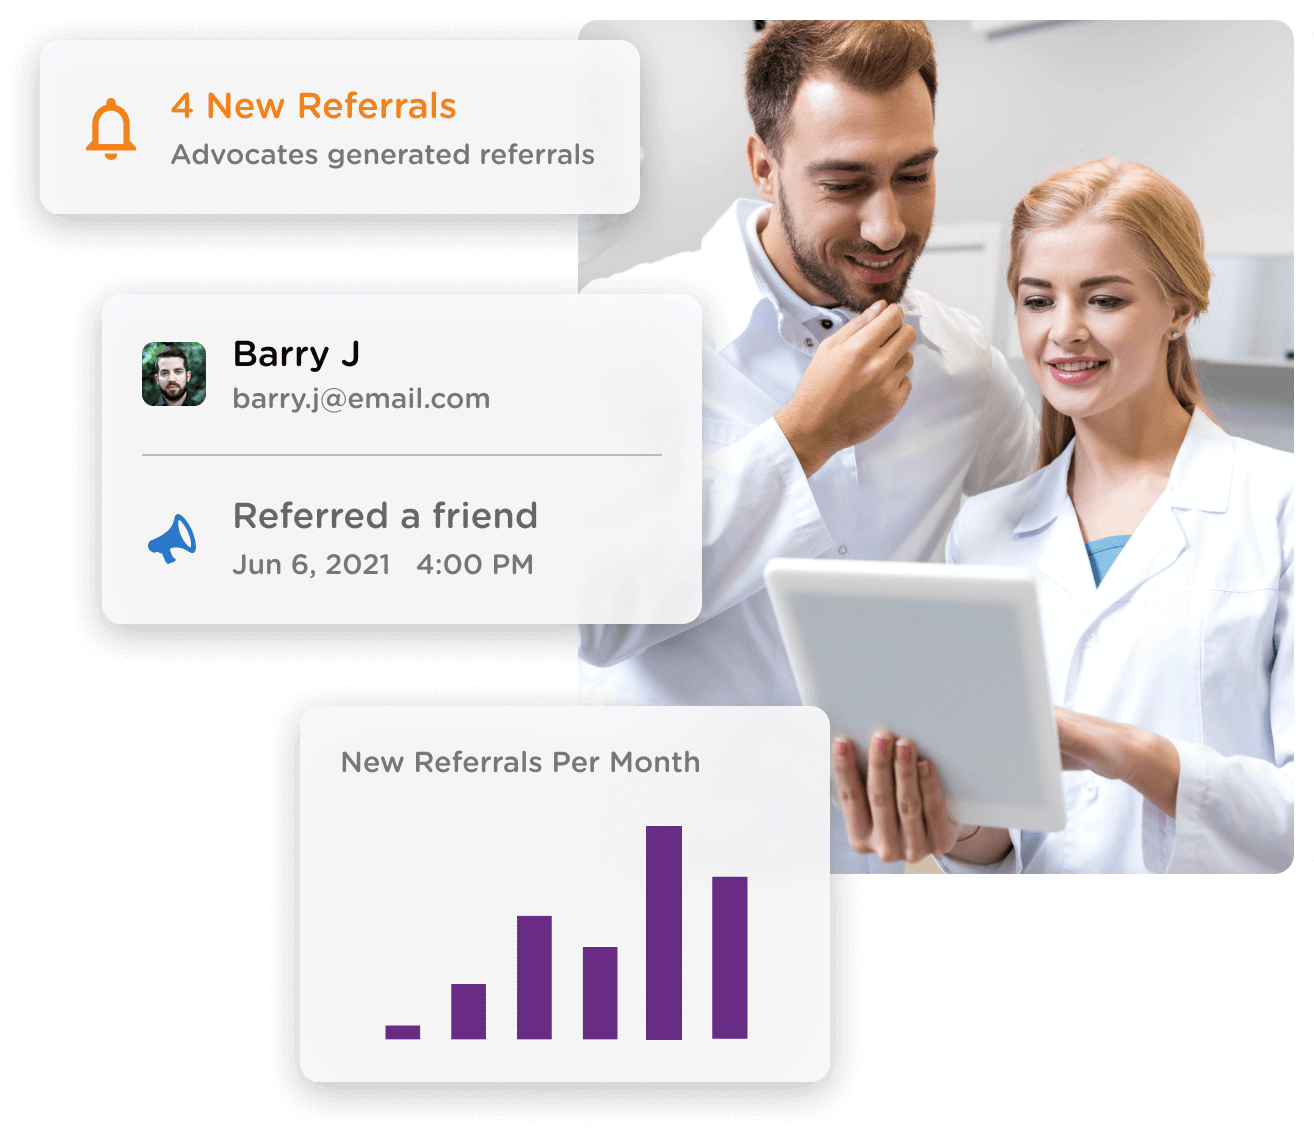 LocalReferrals allows you to set up a customized referral program and easily see referral insights, including advocate information, new referrals, and referral statistics.